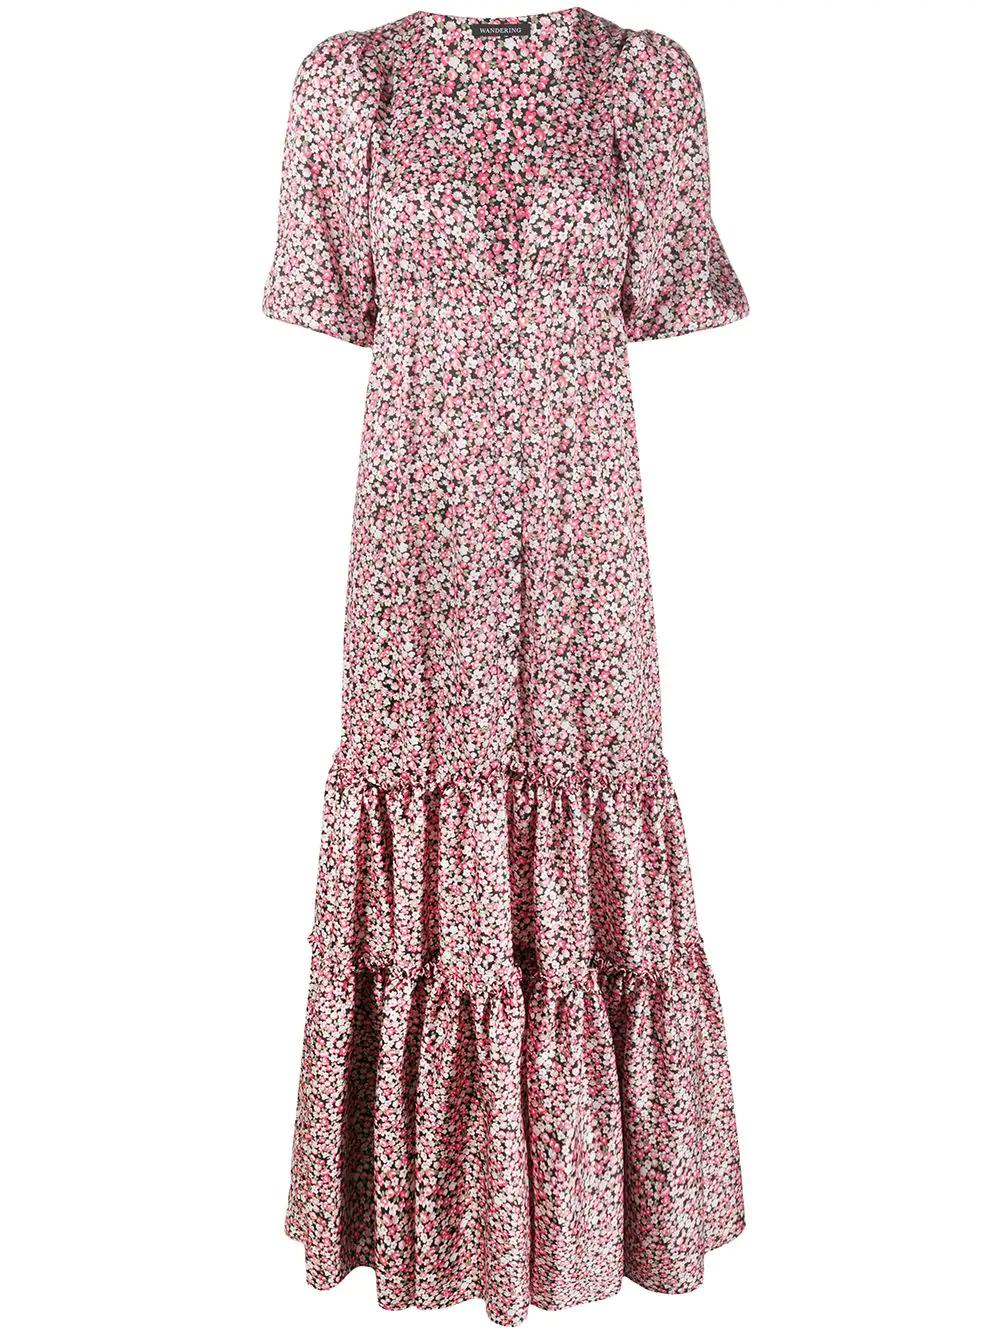 floral-print tiered maxi dress by WANDERING